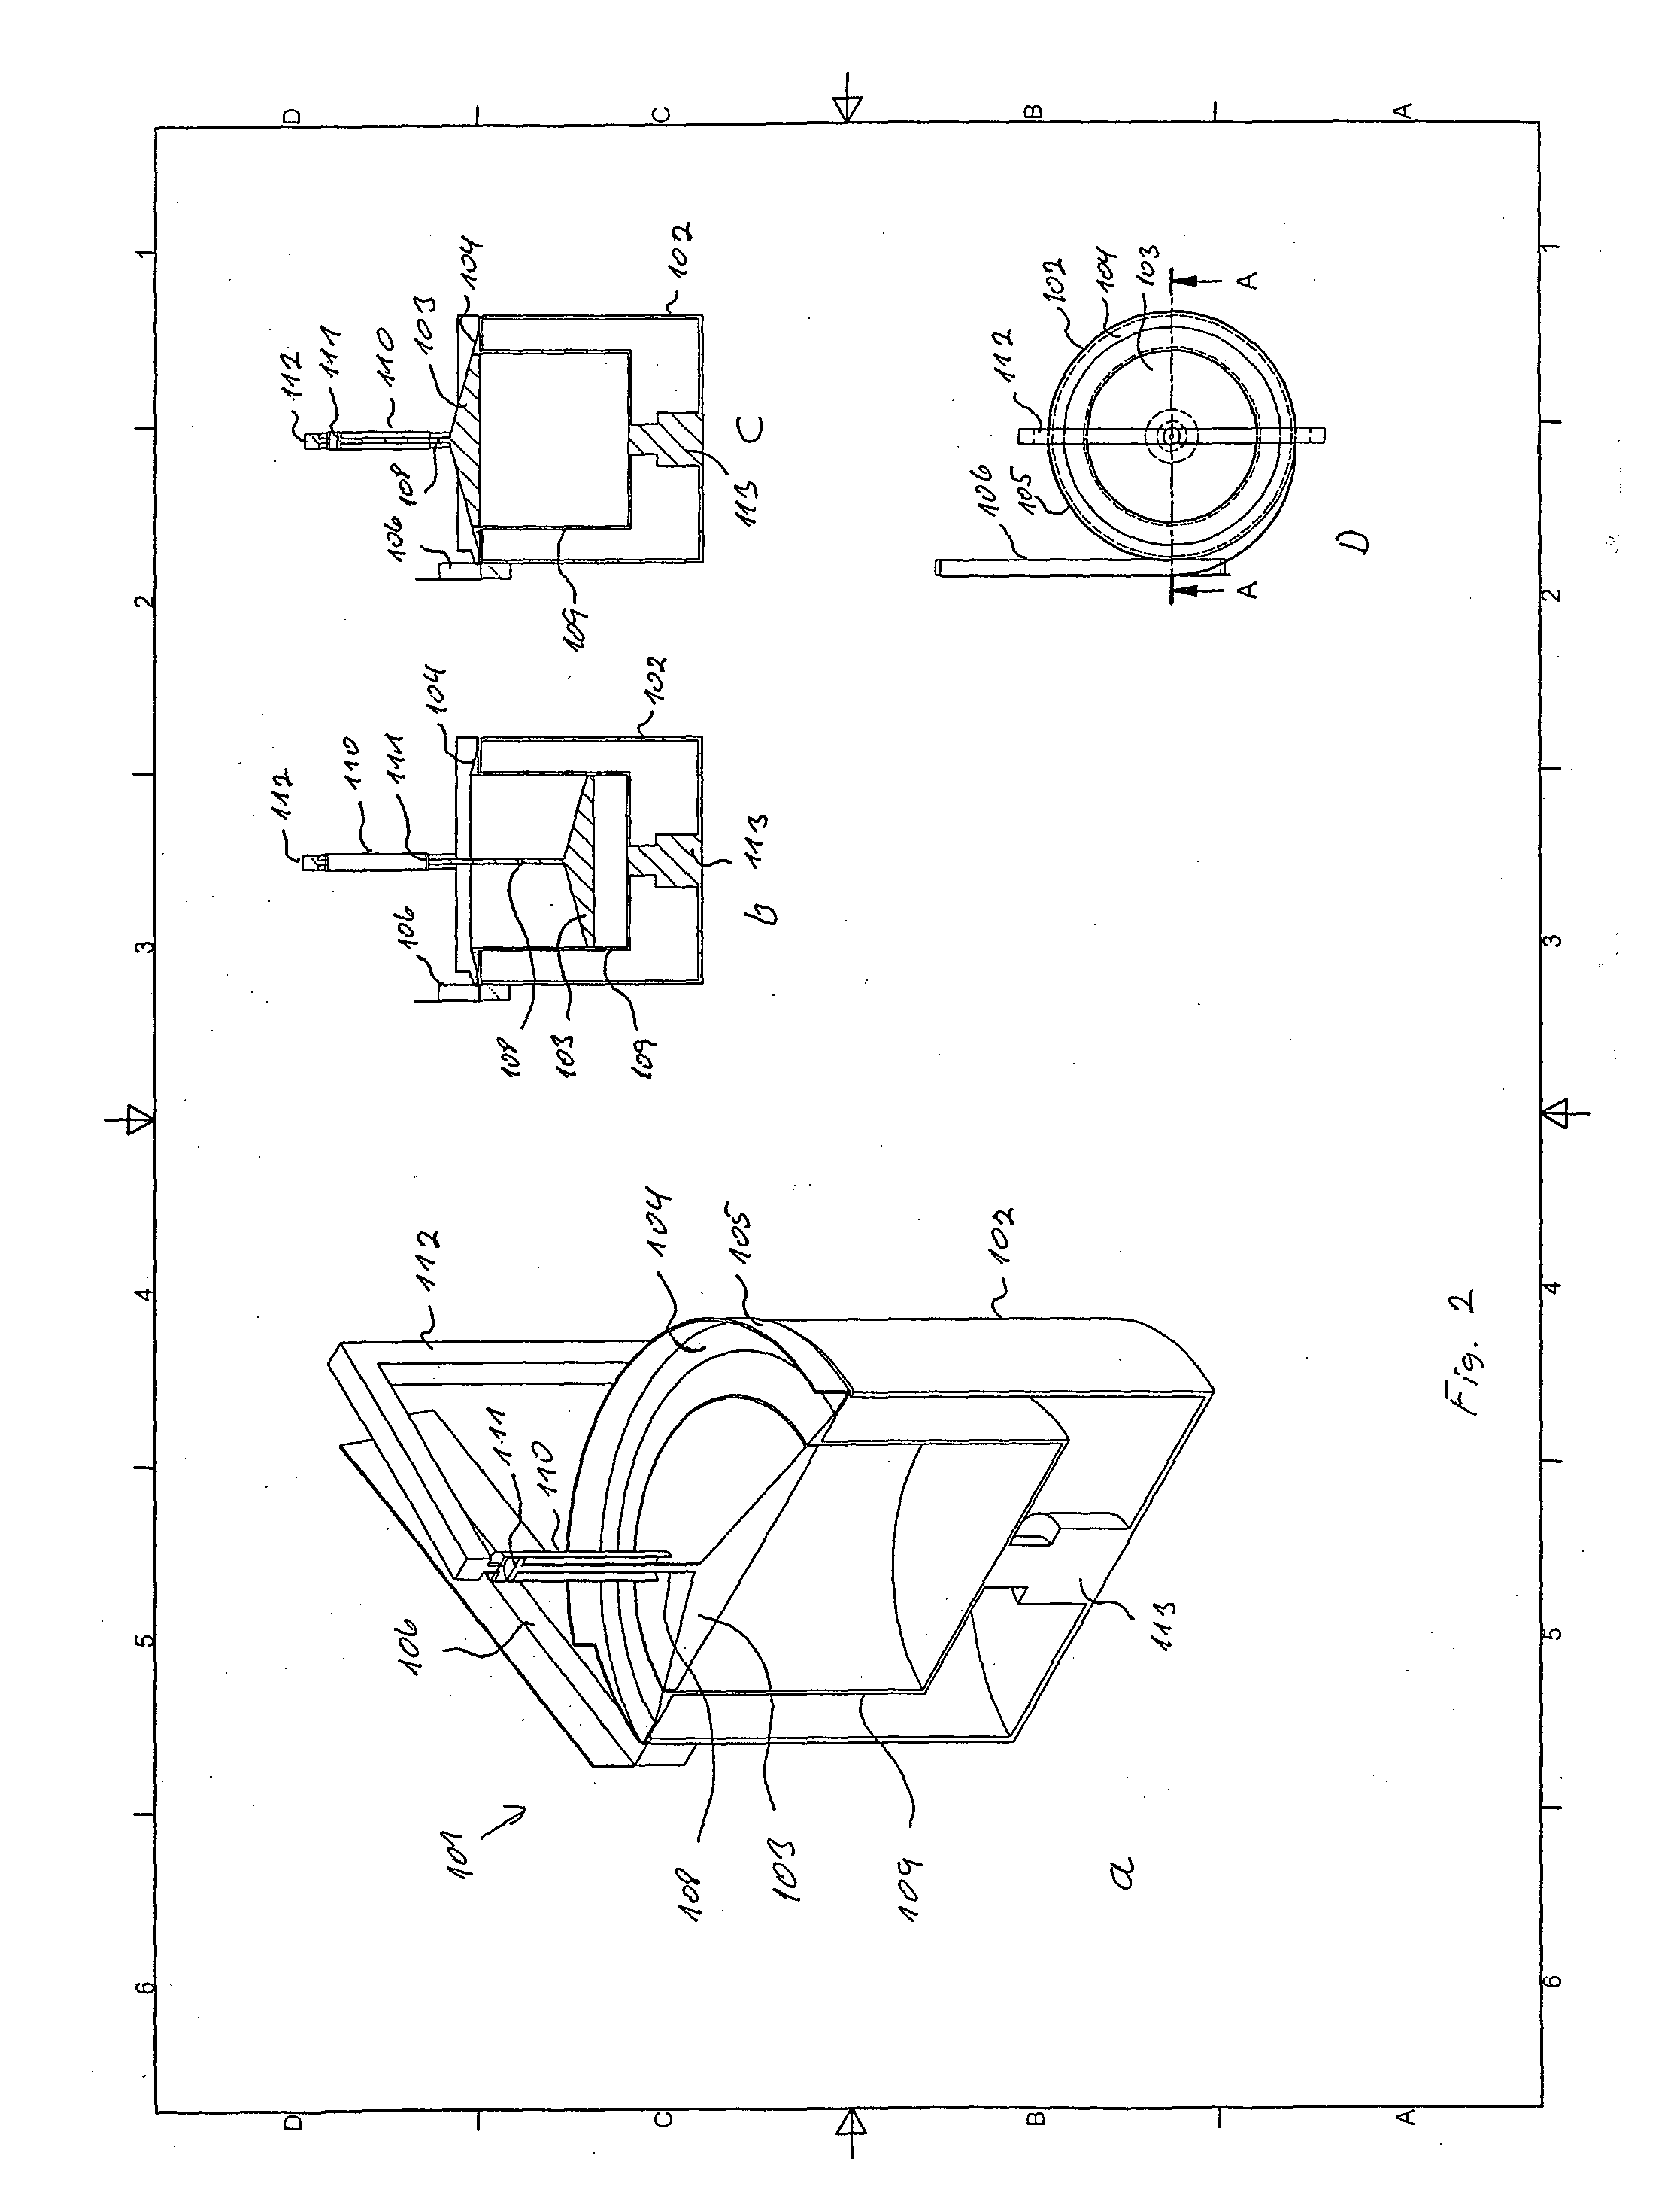 System and Method for Receiving and Feeding Used Beverage Containers (UBC) to at Least One Conveyor